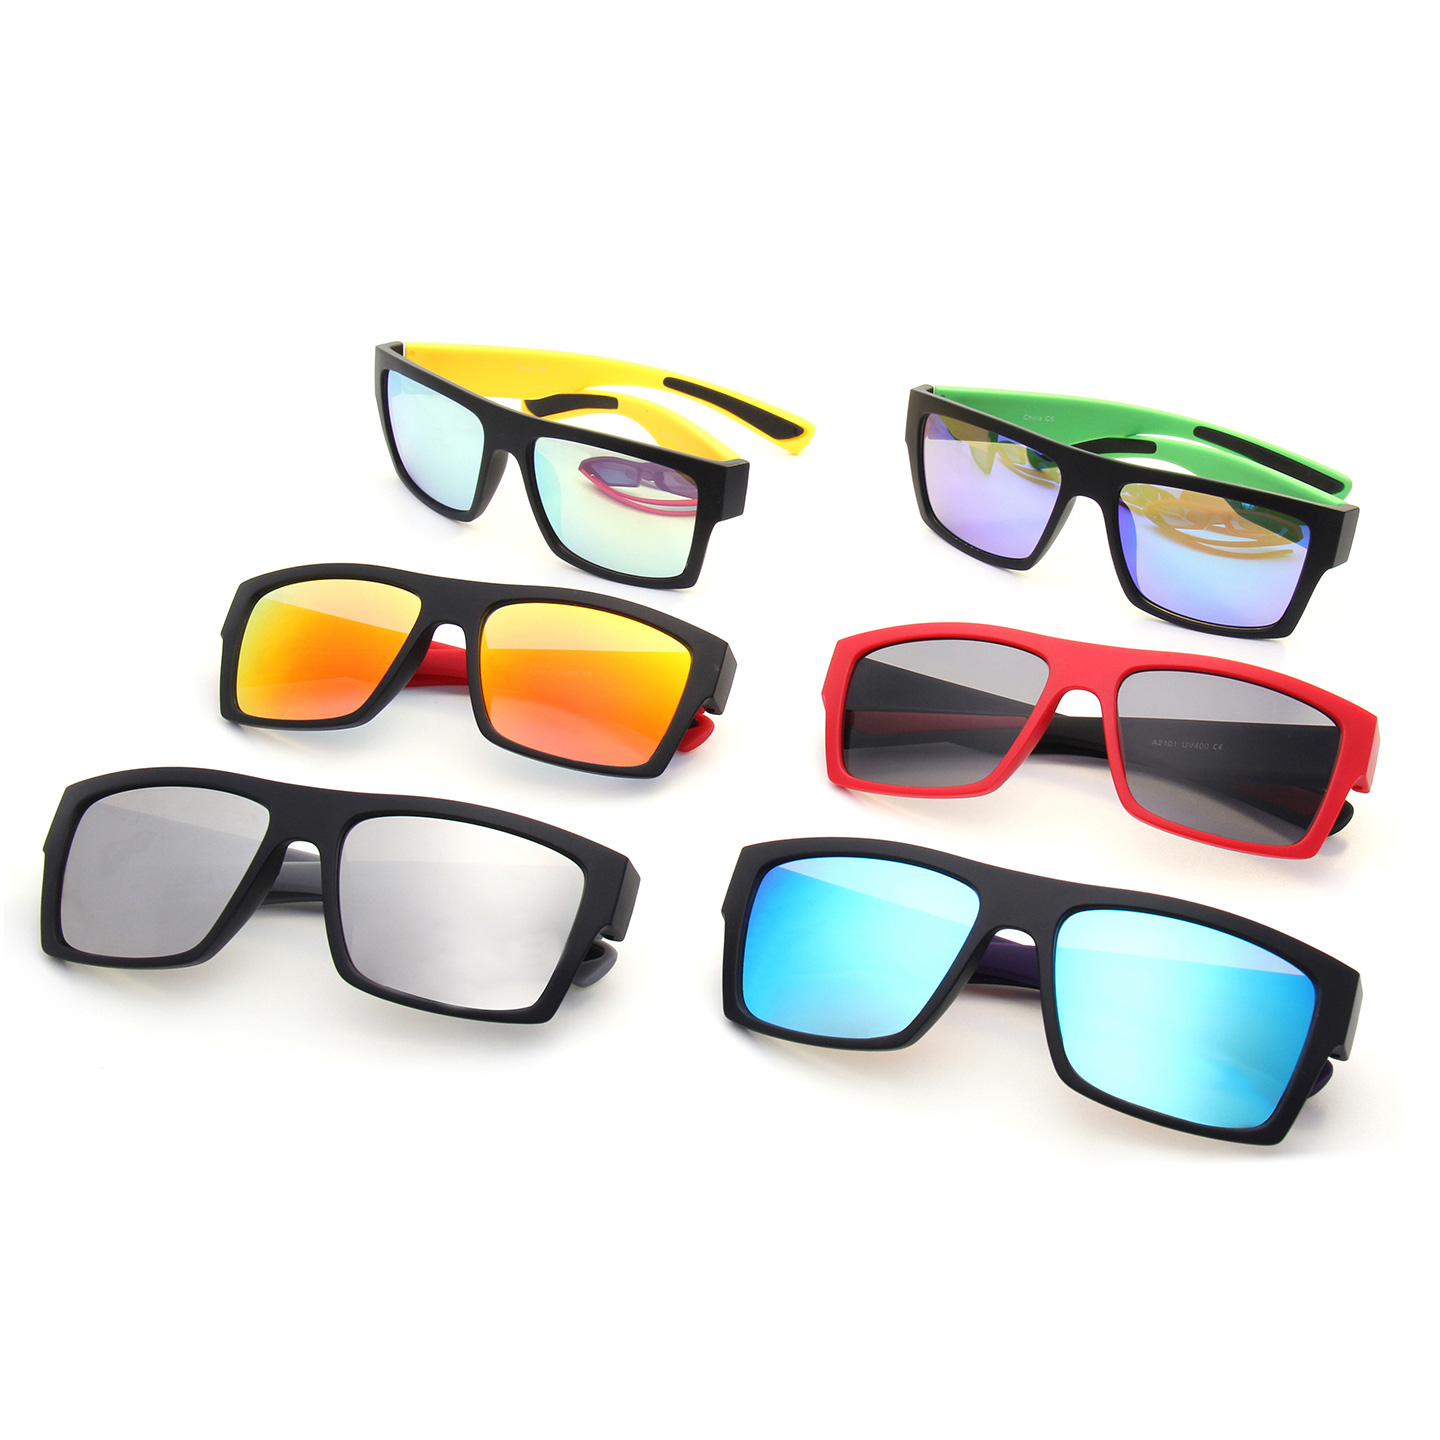 Eugenia modern wholesale sport sunglasses new arrival for outdoor-1